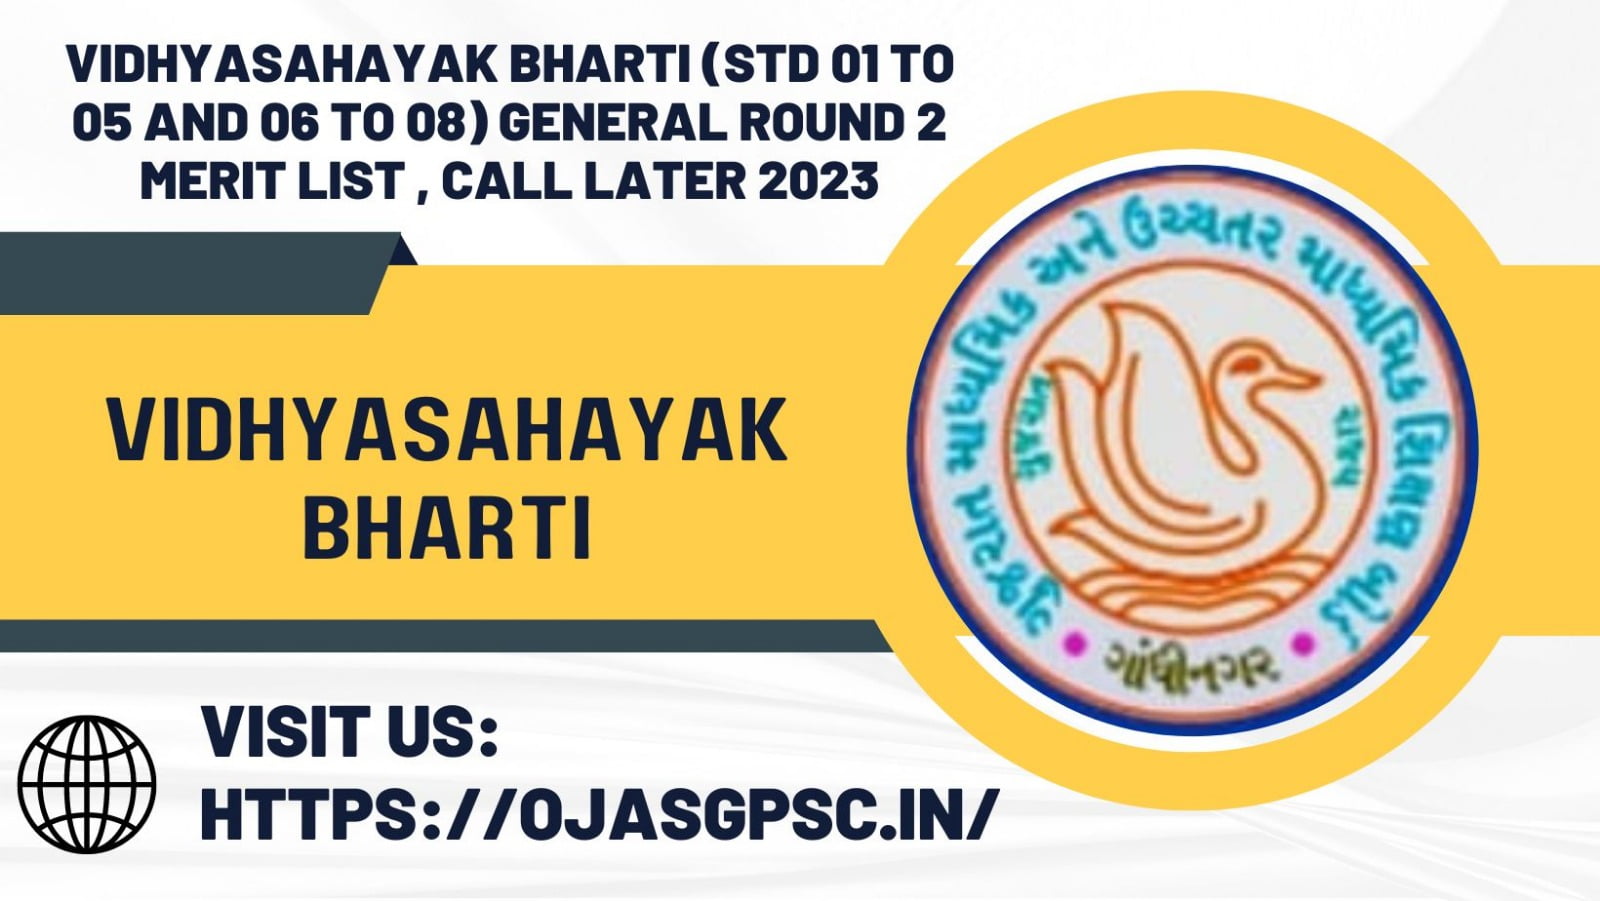 Vidhyasahayak Bharti (Std 01 to 05 and Std 06 to 08) General Round 2 Merit List, Call Letter 2023